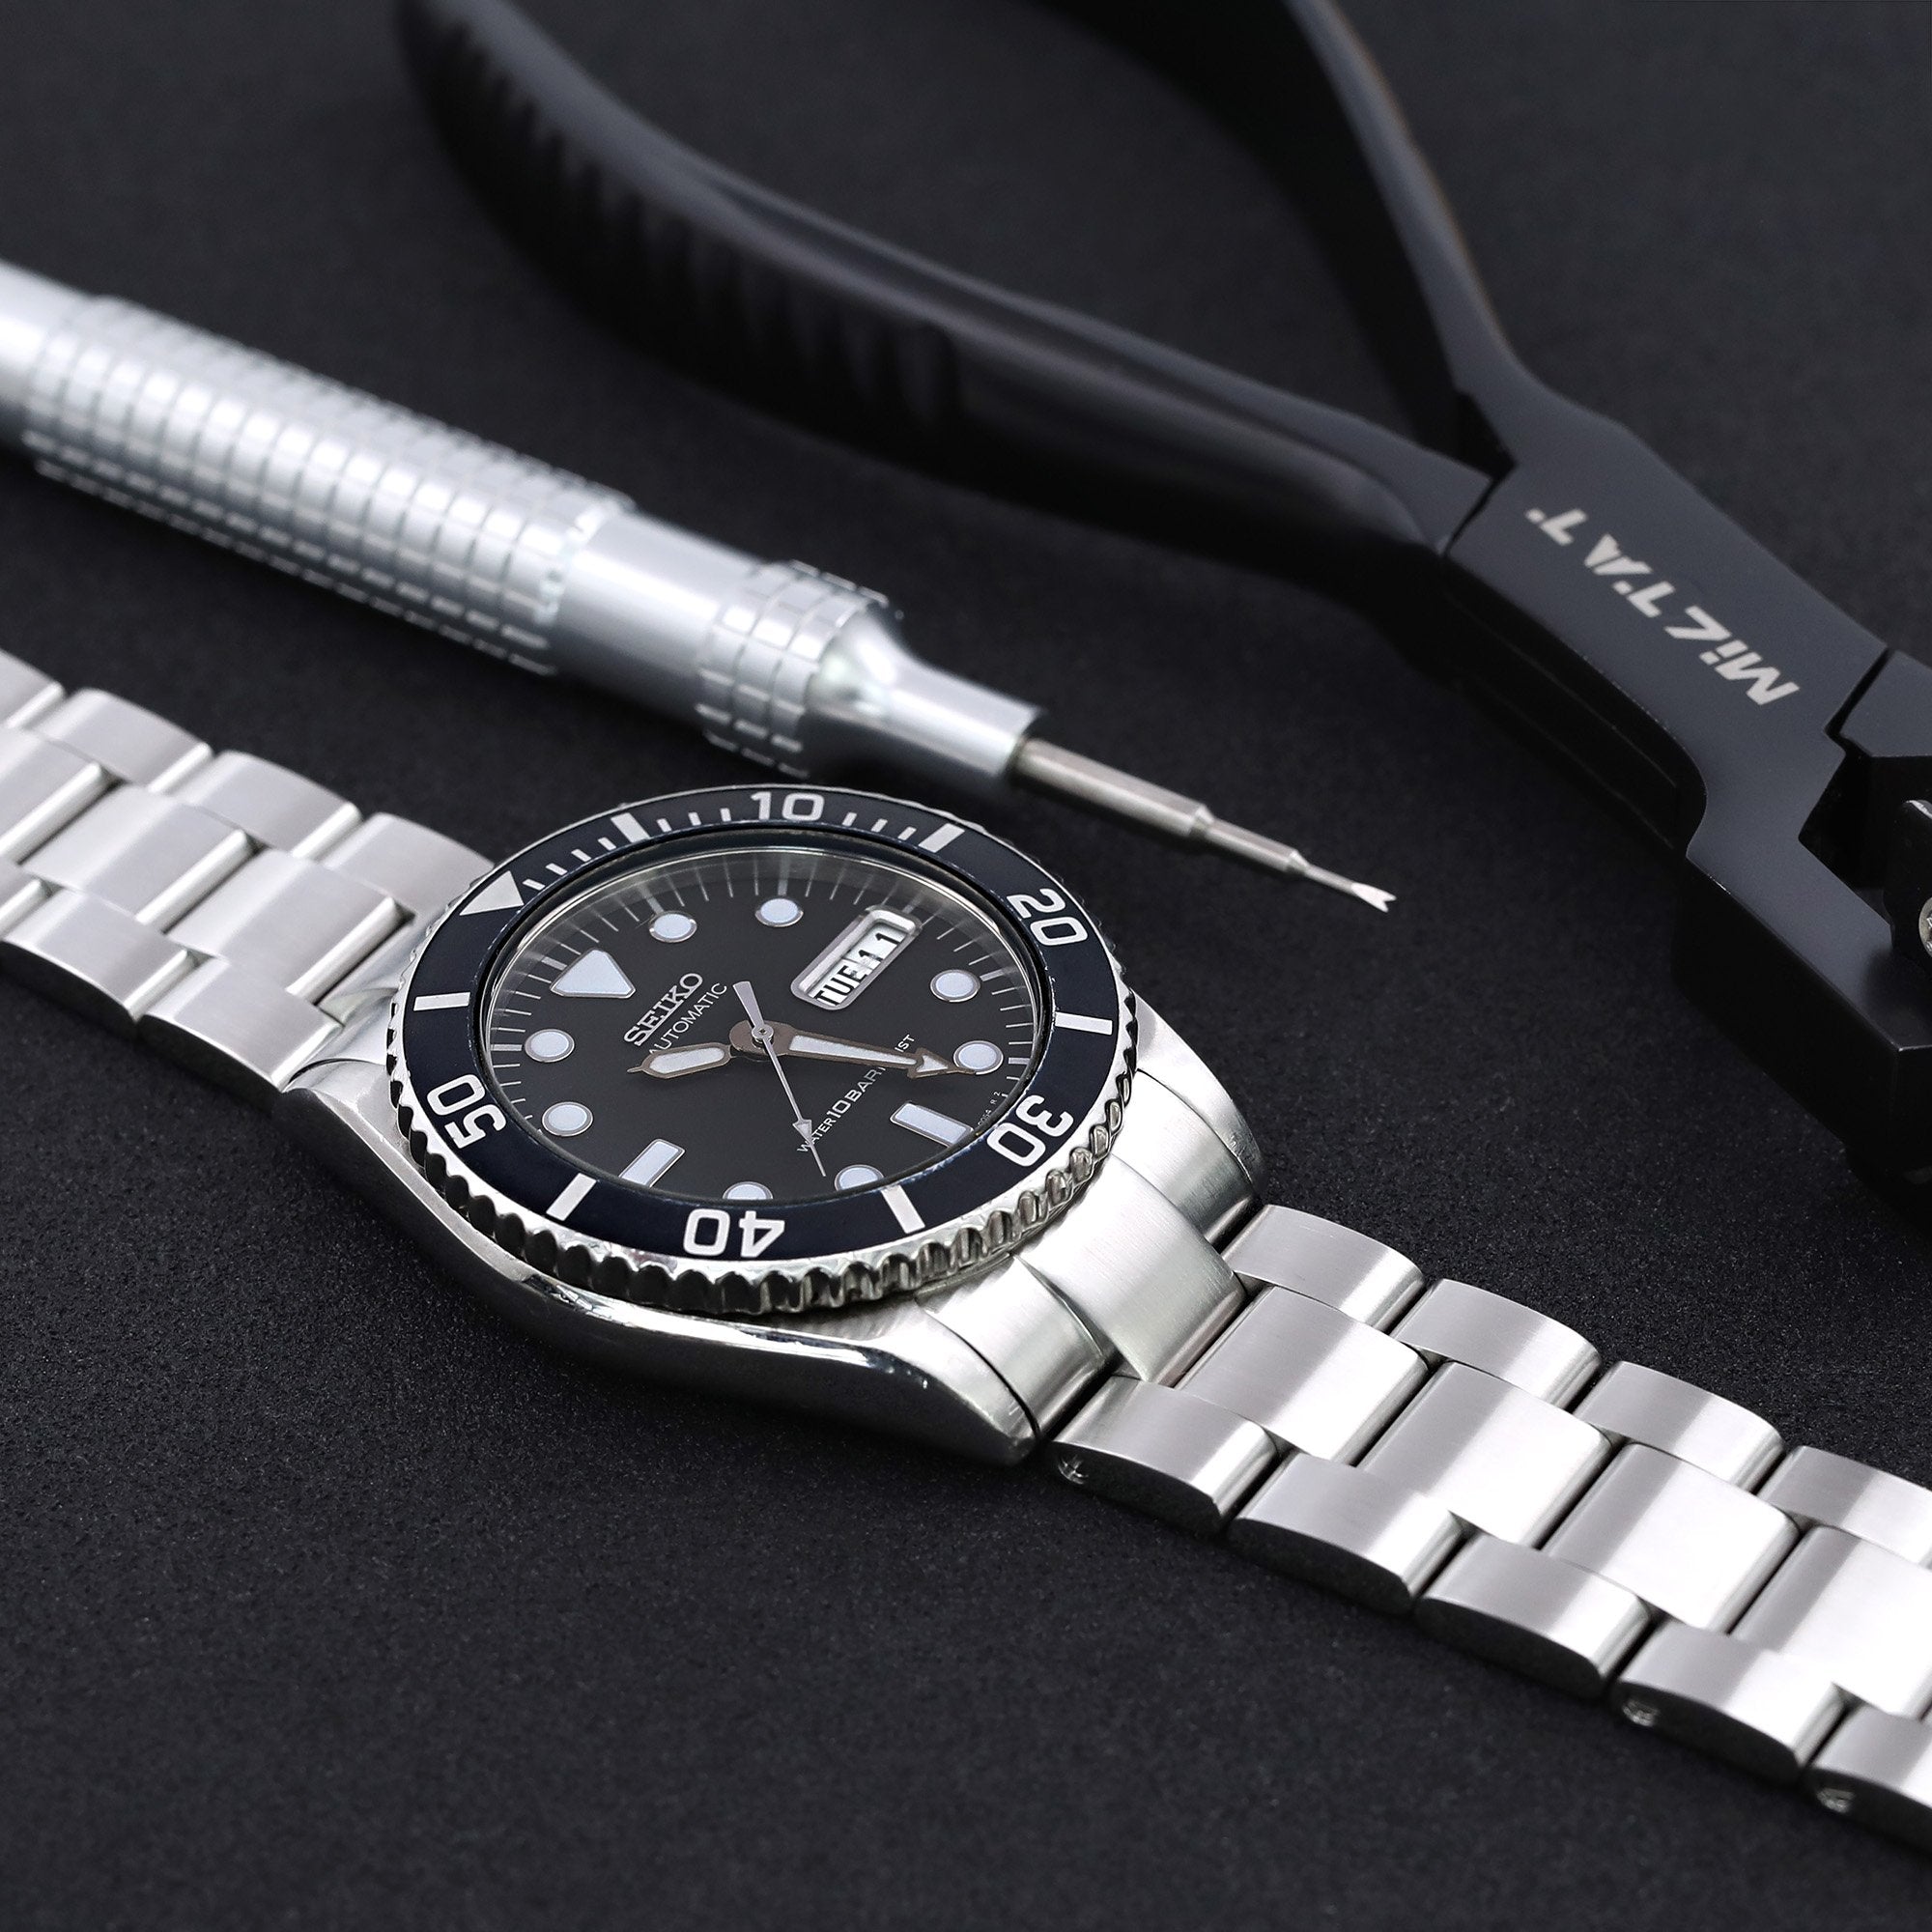 20mm Super-O Boyer Watch Bracelet for SEIKO Mid-size Diver SKX023, Ratchet Buckle, Brush Strapcode Watch Bands